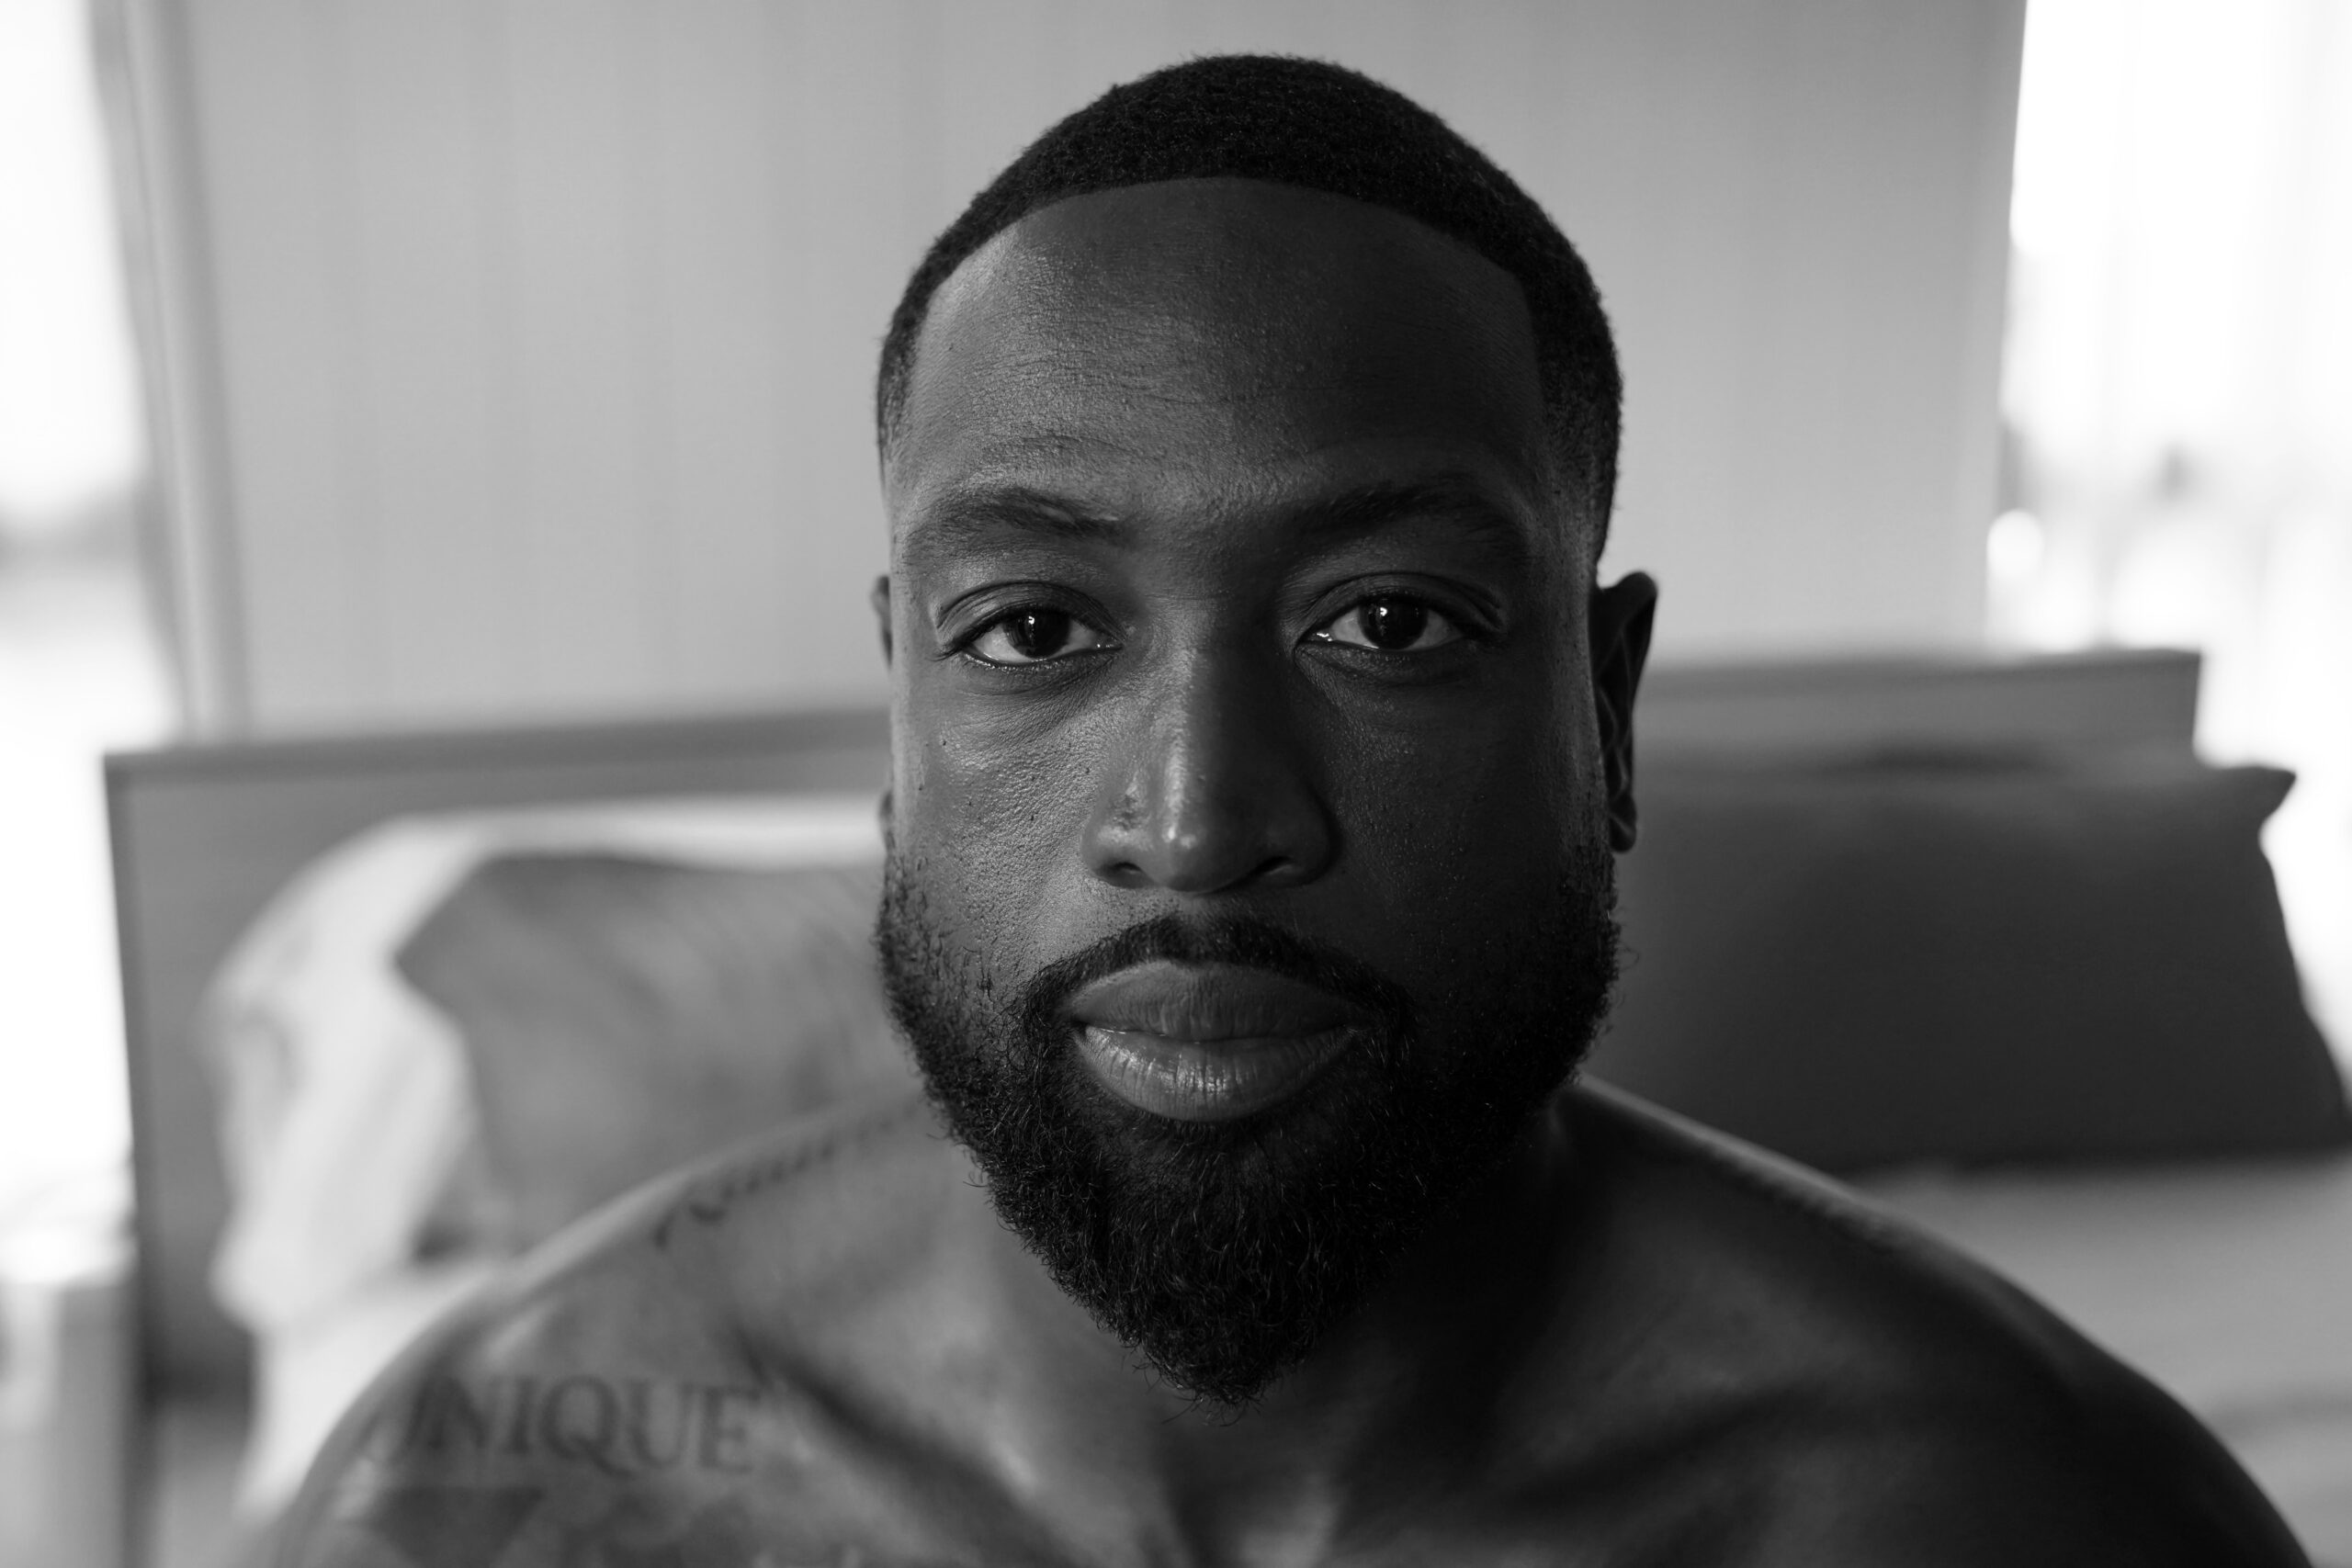 Dwyane Wade on Being an “Aging Athlete” and Keeping His Edge